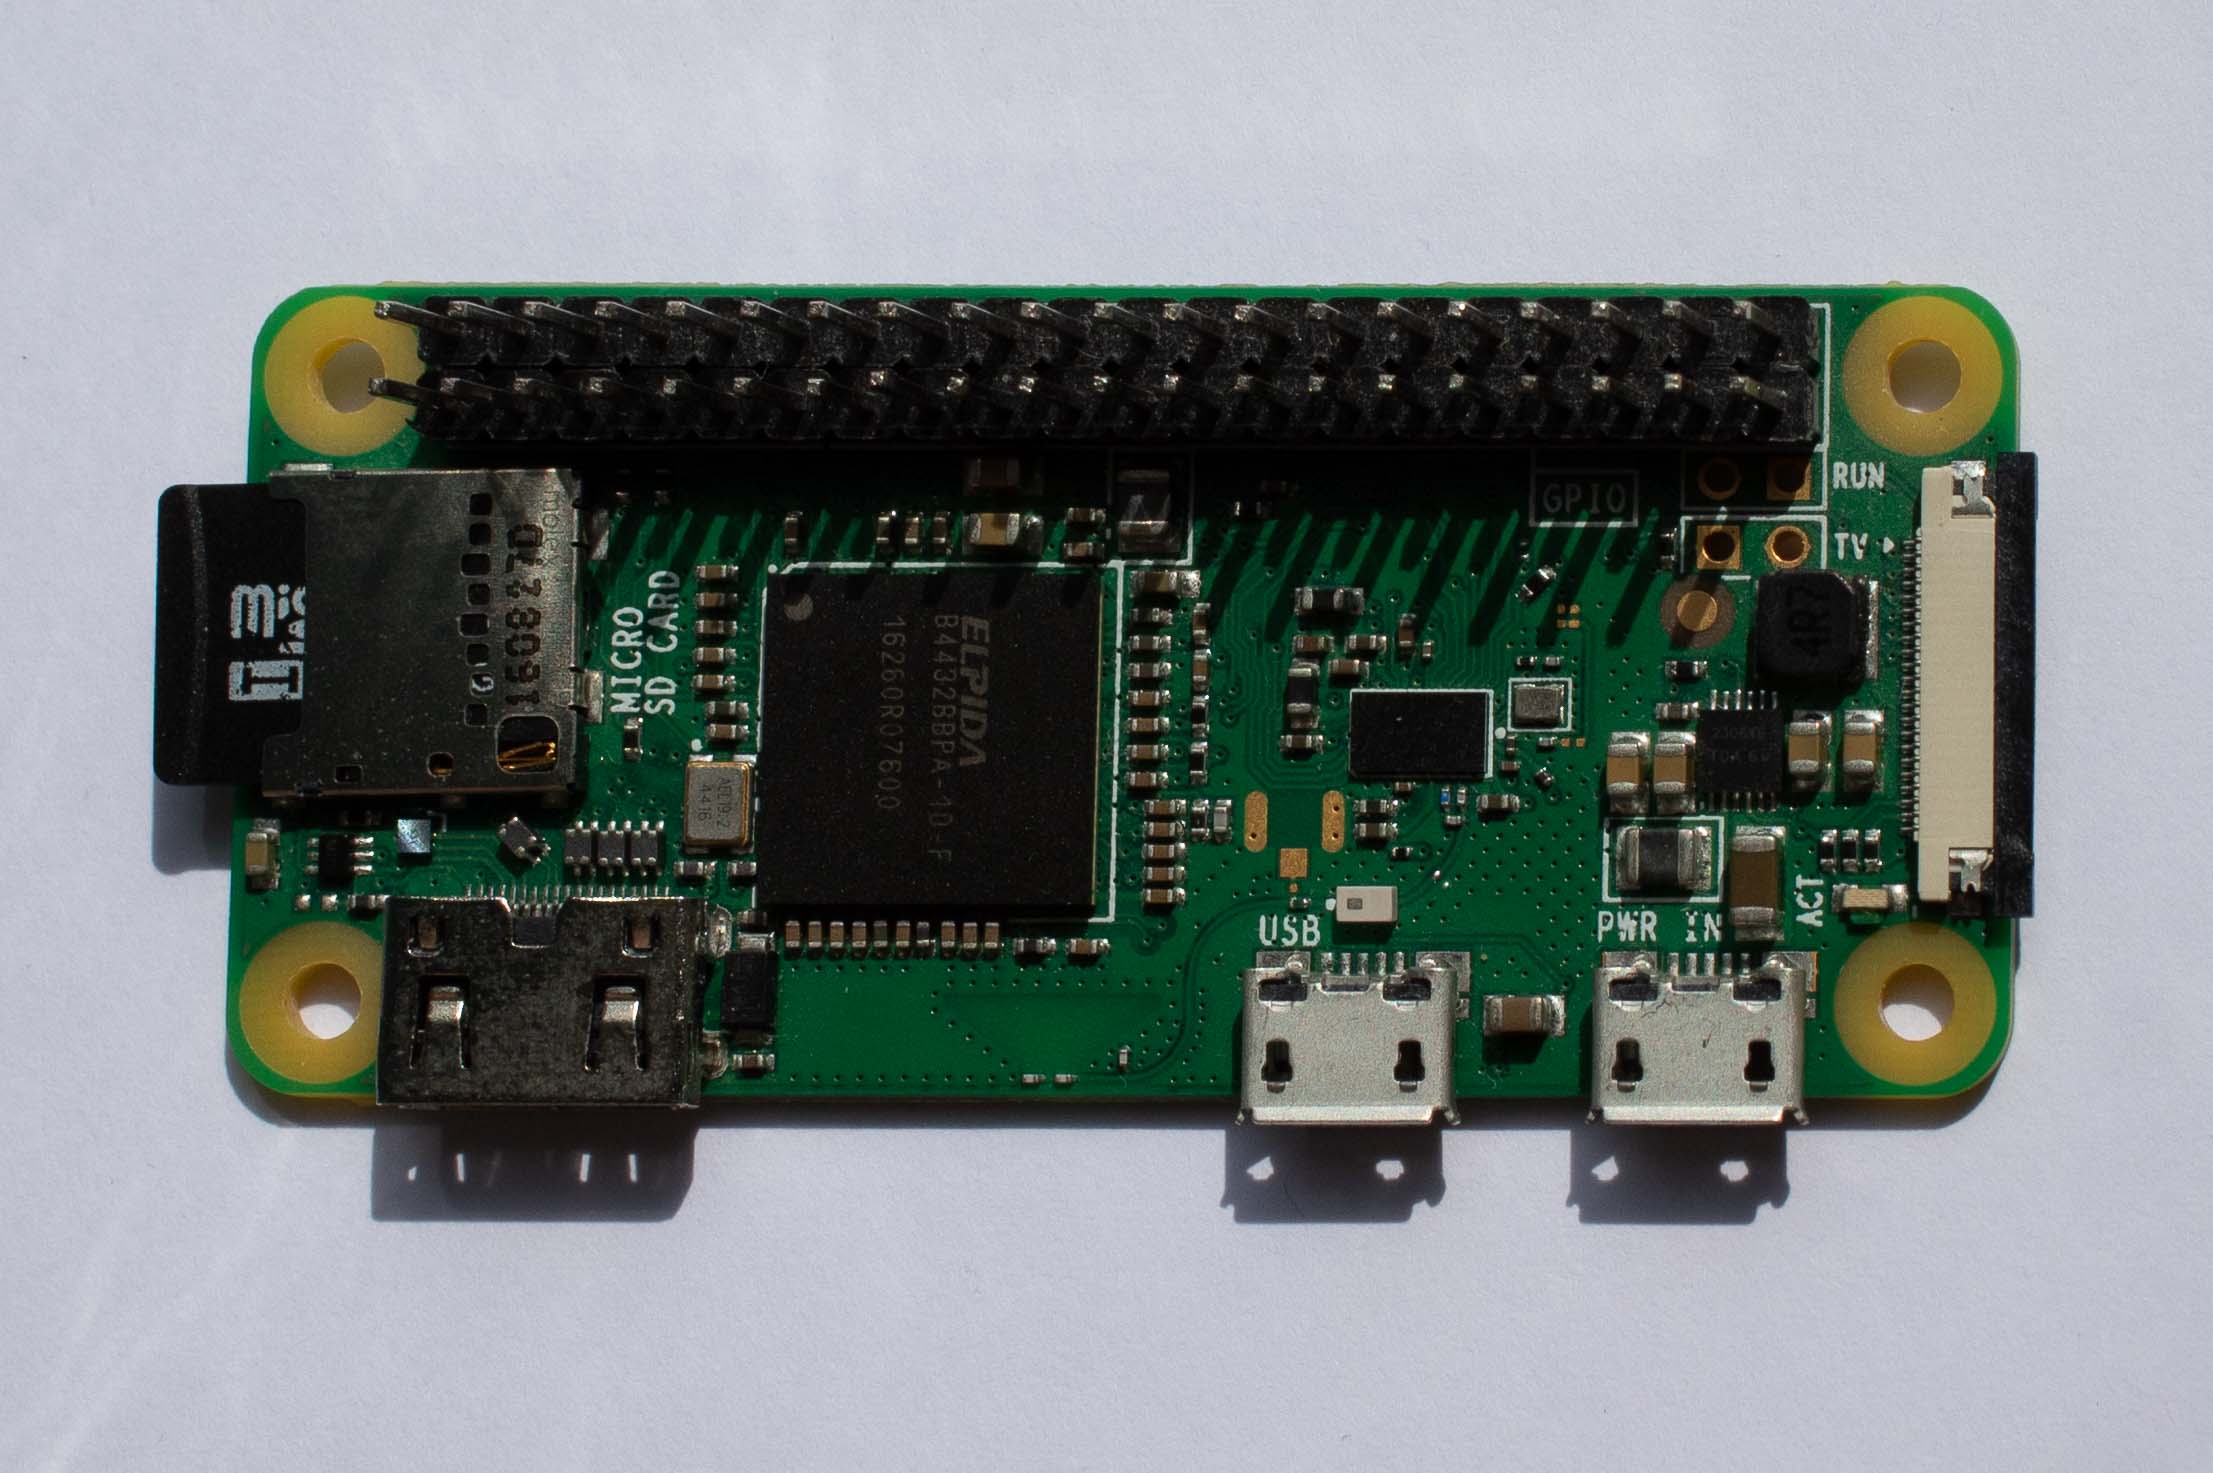 Setting up a Raspberry Pi Zero W without a Display, Keyboard and Mouse